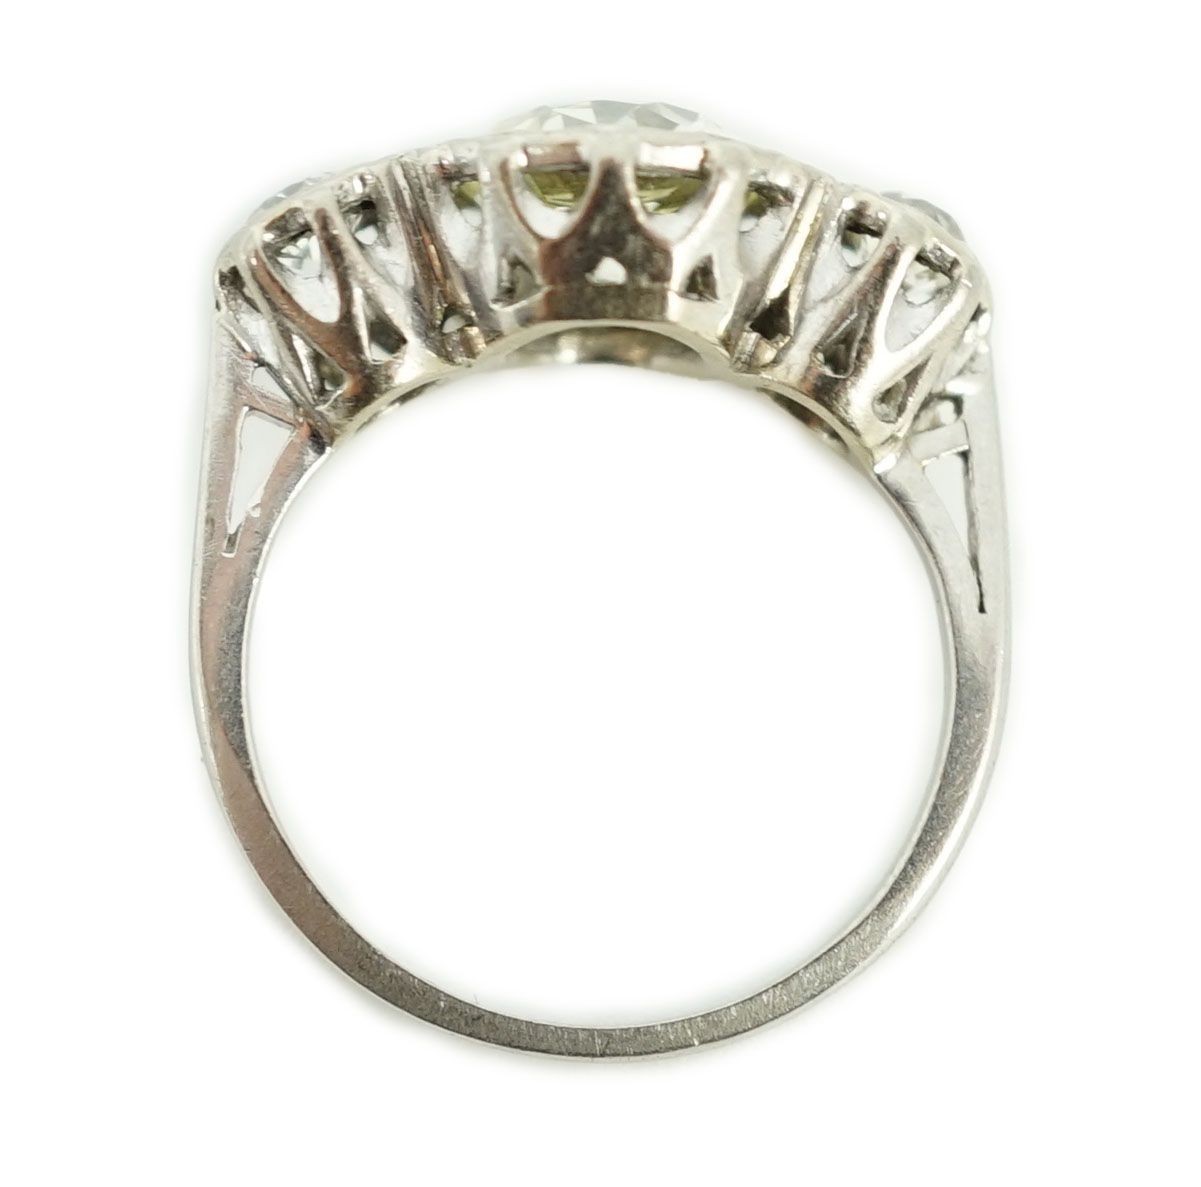 A white gold and collet set three stone diamond ring, the central stone weight approximately 2.08ct